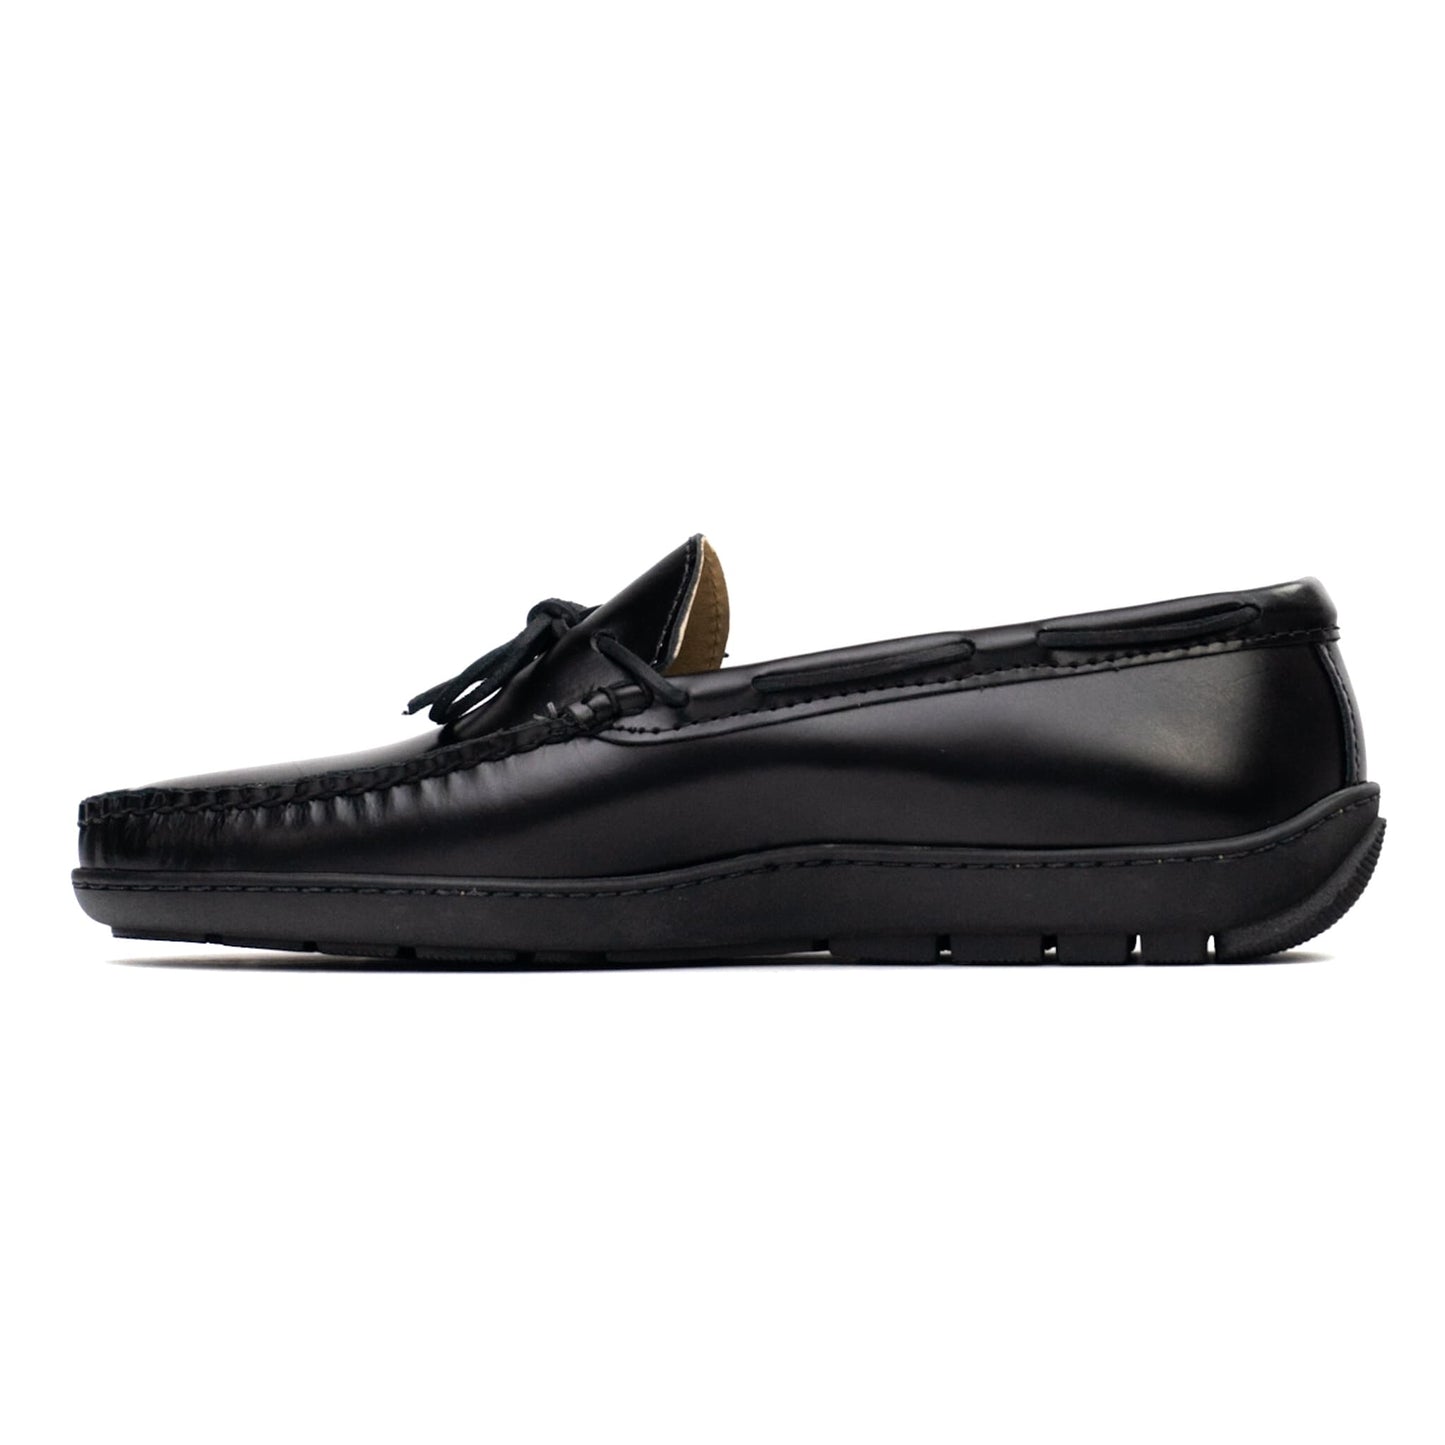 Driving Moc Tie Loafers- Black Oiled Full Grain Leather